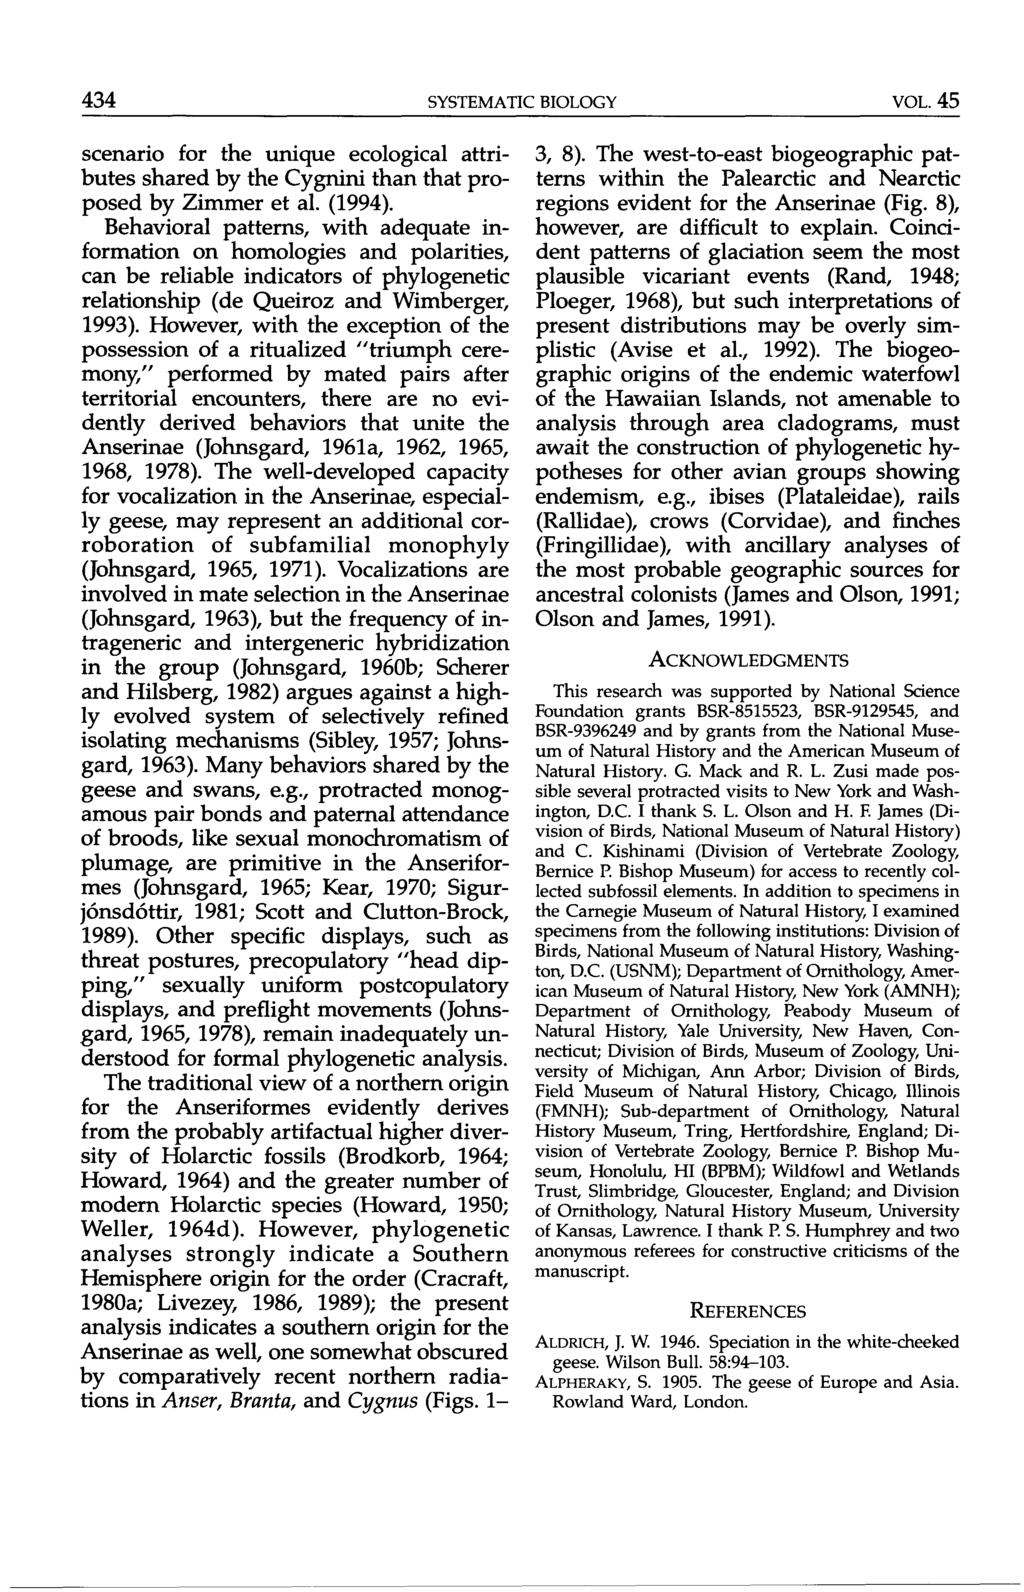 434 SYSTEMATIC BIOLOGY VOL. 45 scenario for the unique ecological attributes shared by the Cygnini than that proposed by Zimmer et al. (1994).